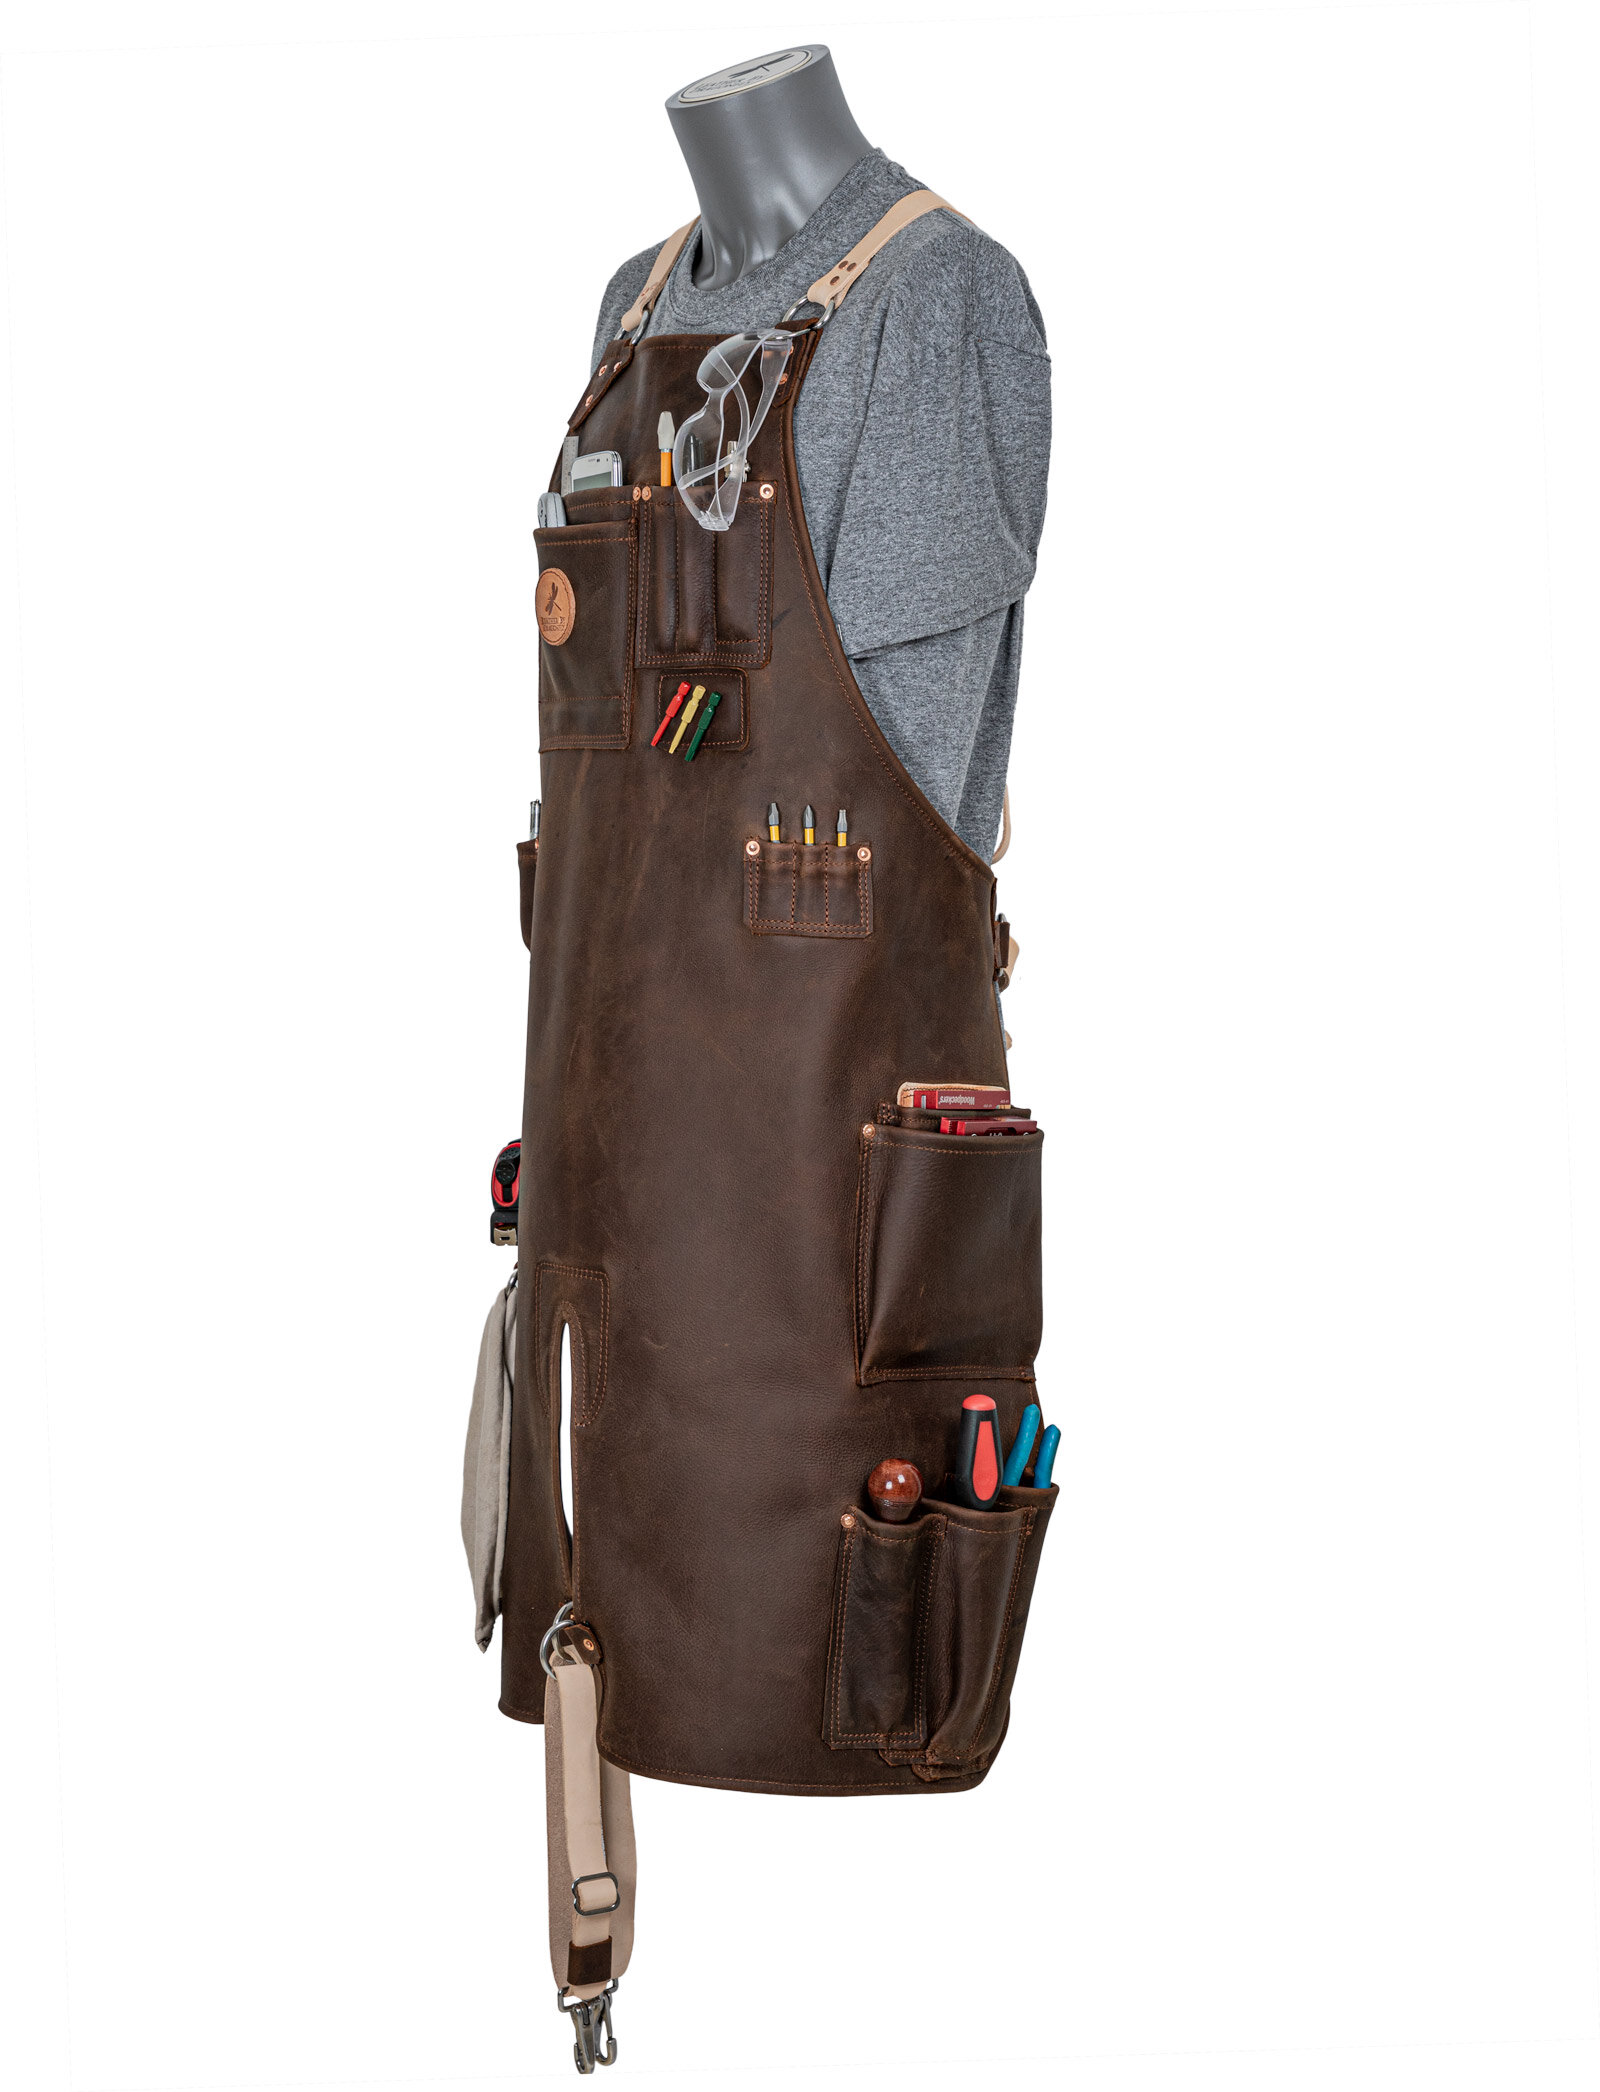 Metal Shop, Welding or Fabrication Leather Shop Apron — Leather Aprons for  woodworking, tattoo, salon, barista, luthier, gunsmith